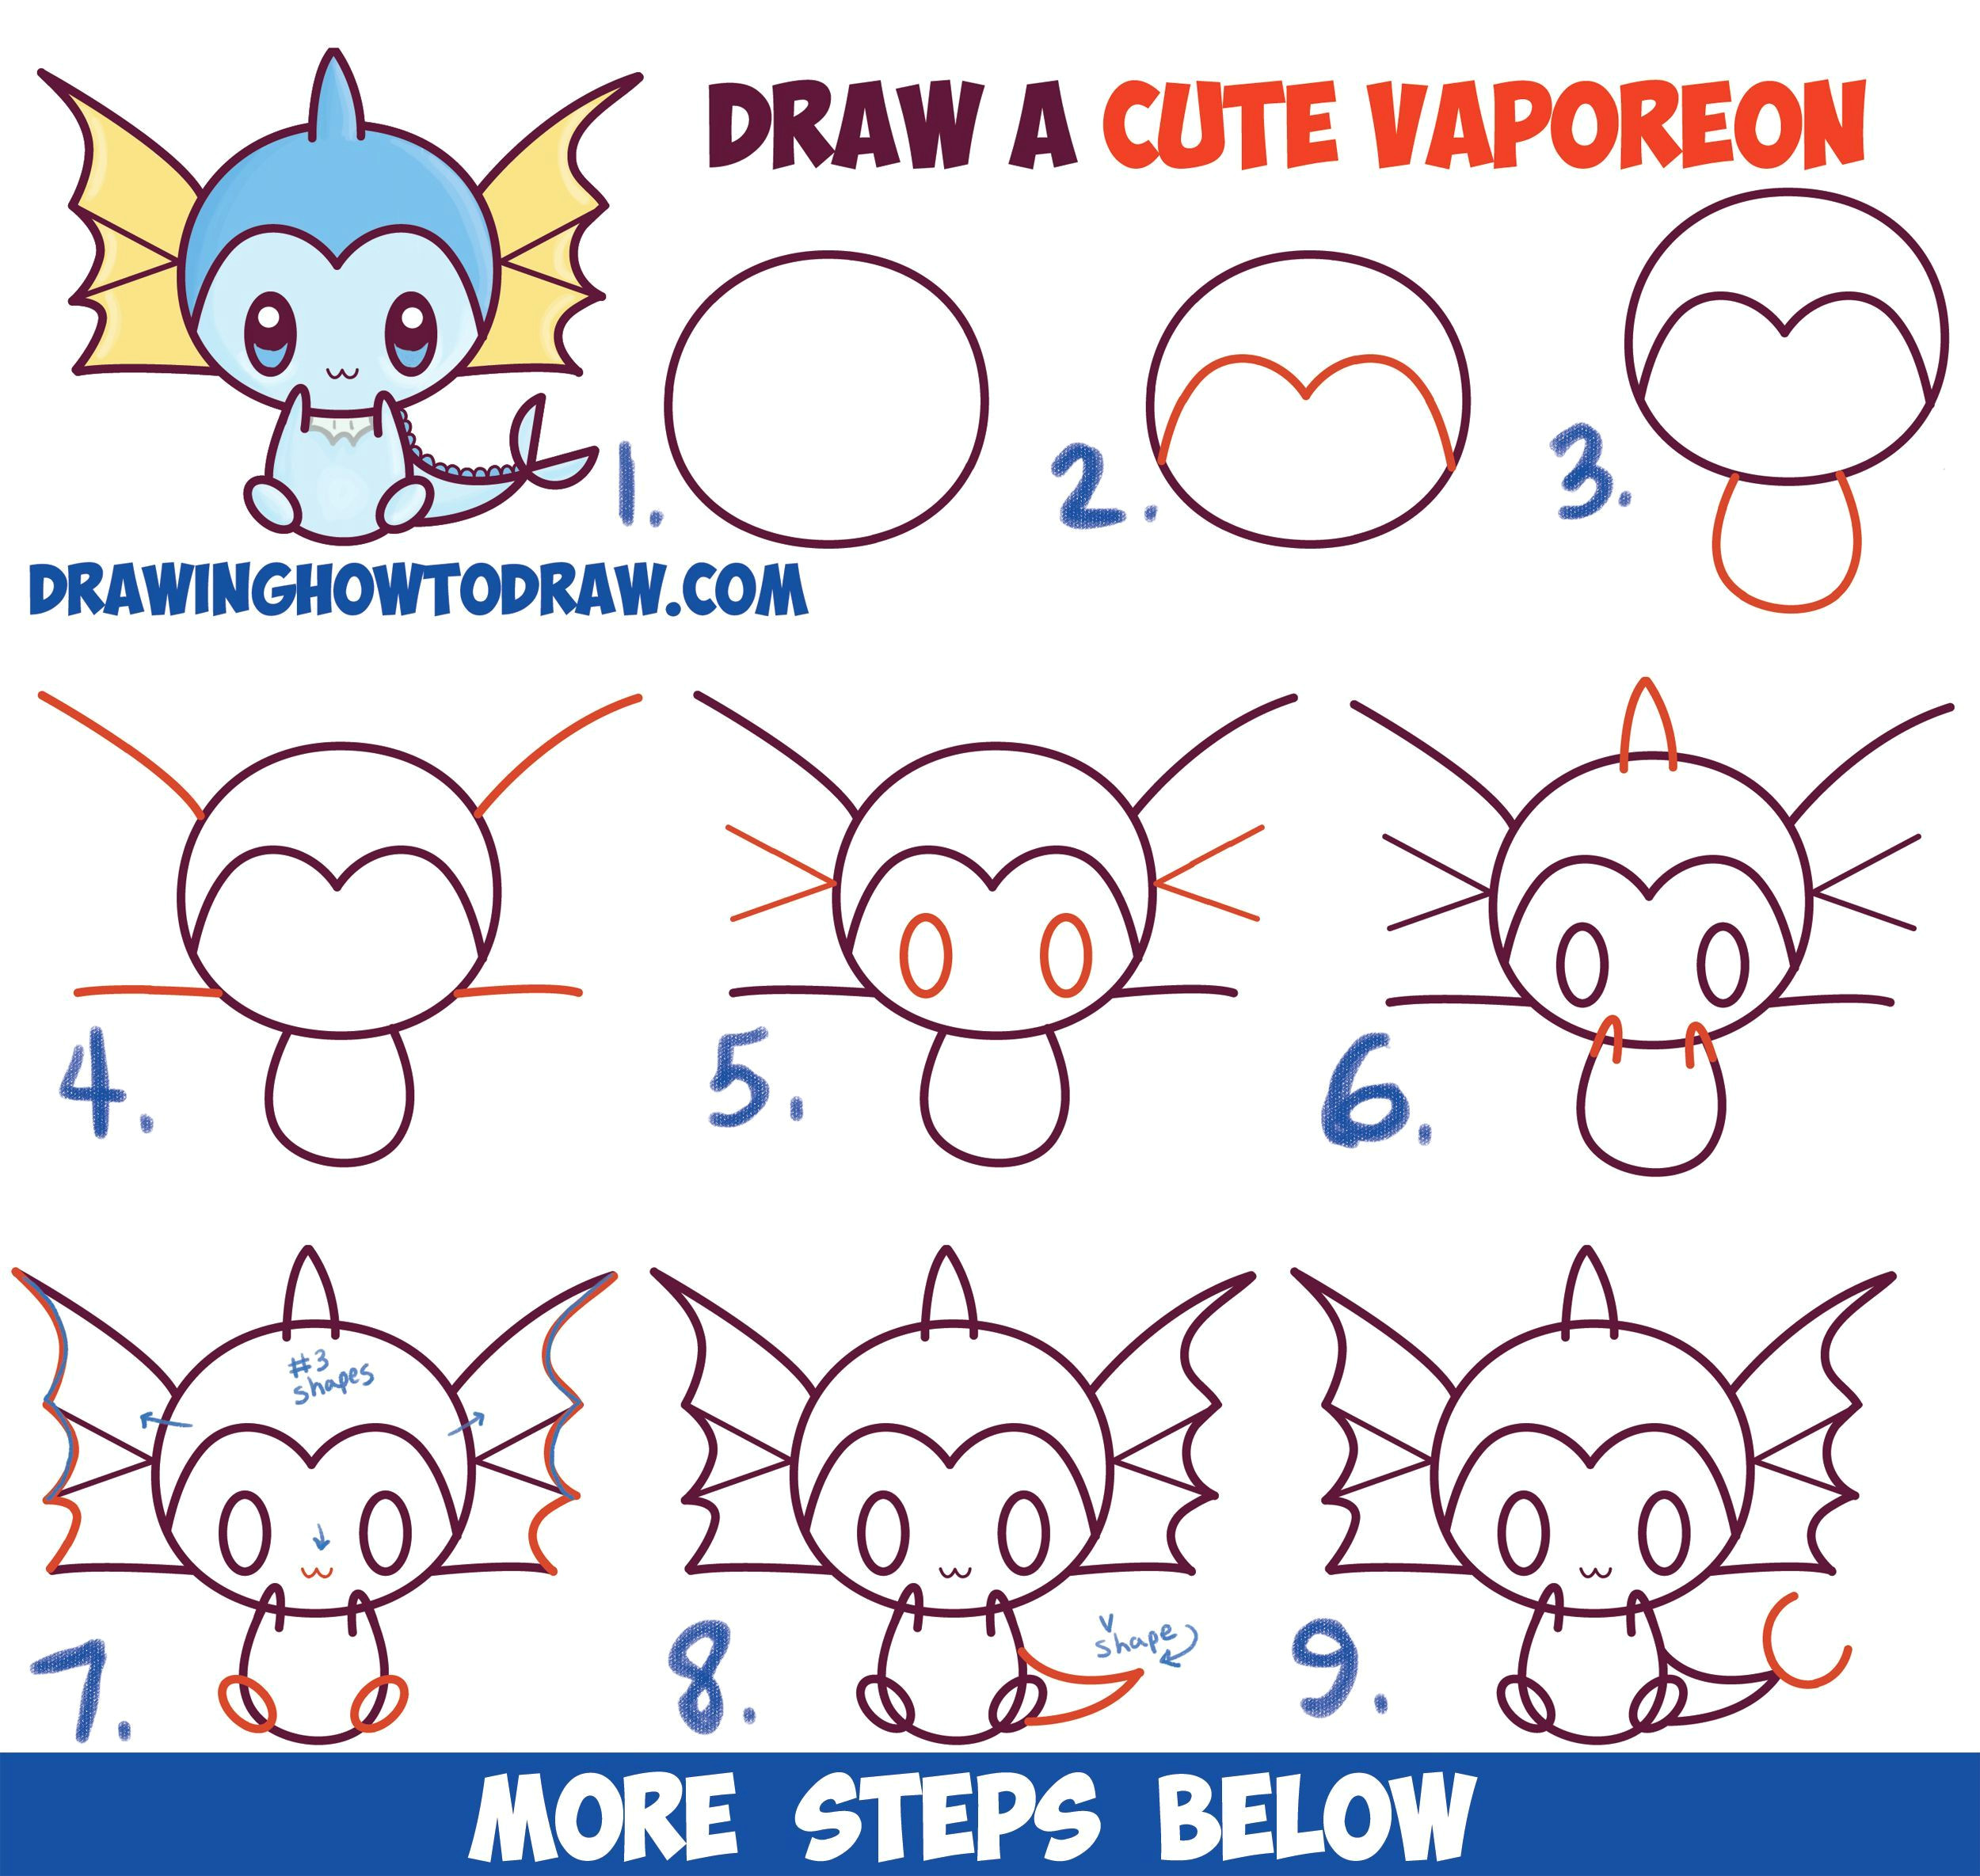 Easy Drawing with Shapes How to Draw Cute Kawaii Chibi Vaporeon From Pokemon Easy Step by